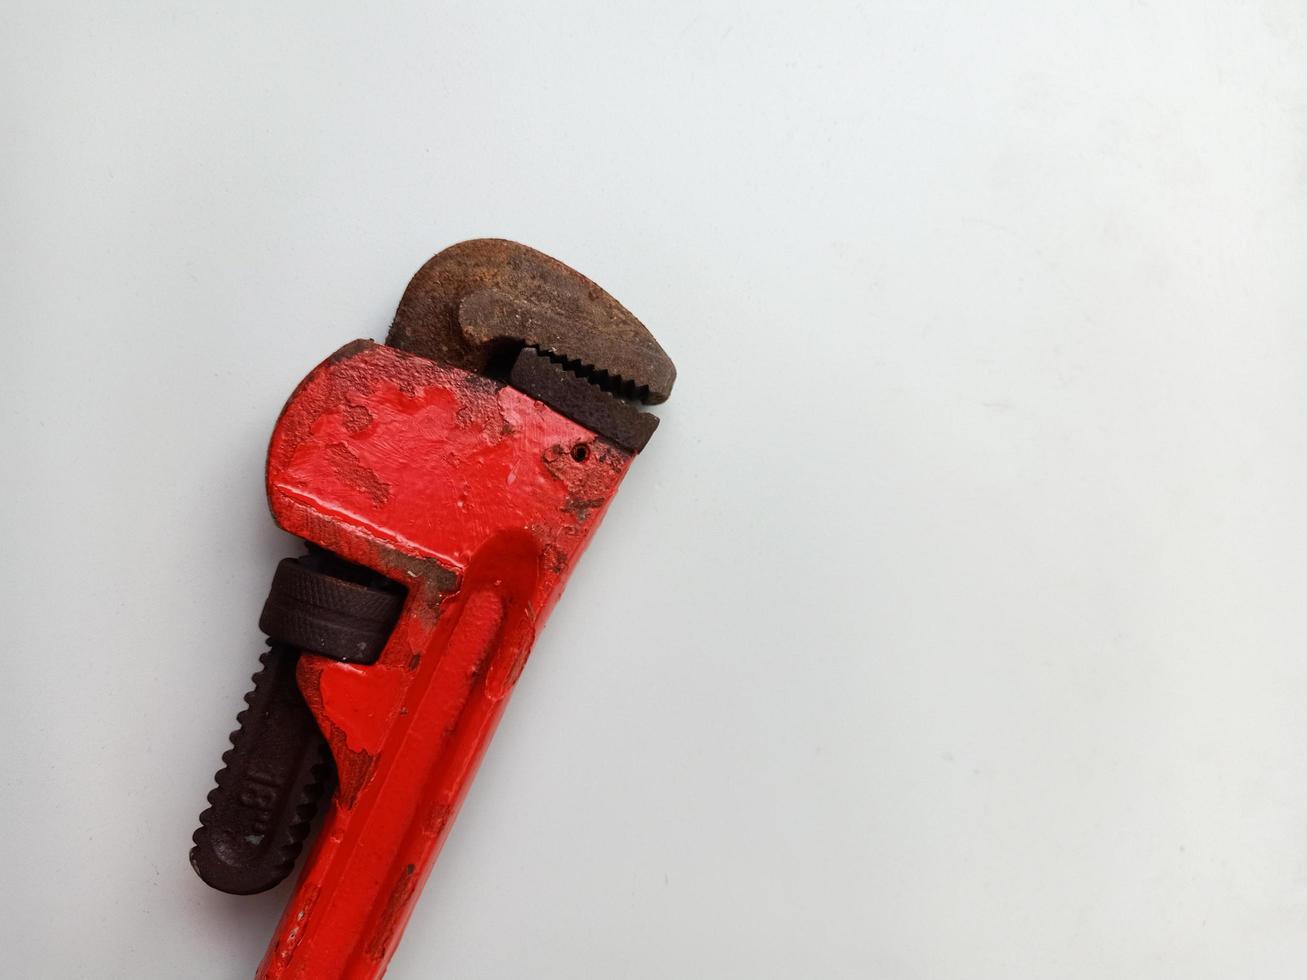 Rusty pipe wrench isolated on white background, photo concept for plumbing tools and equipment